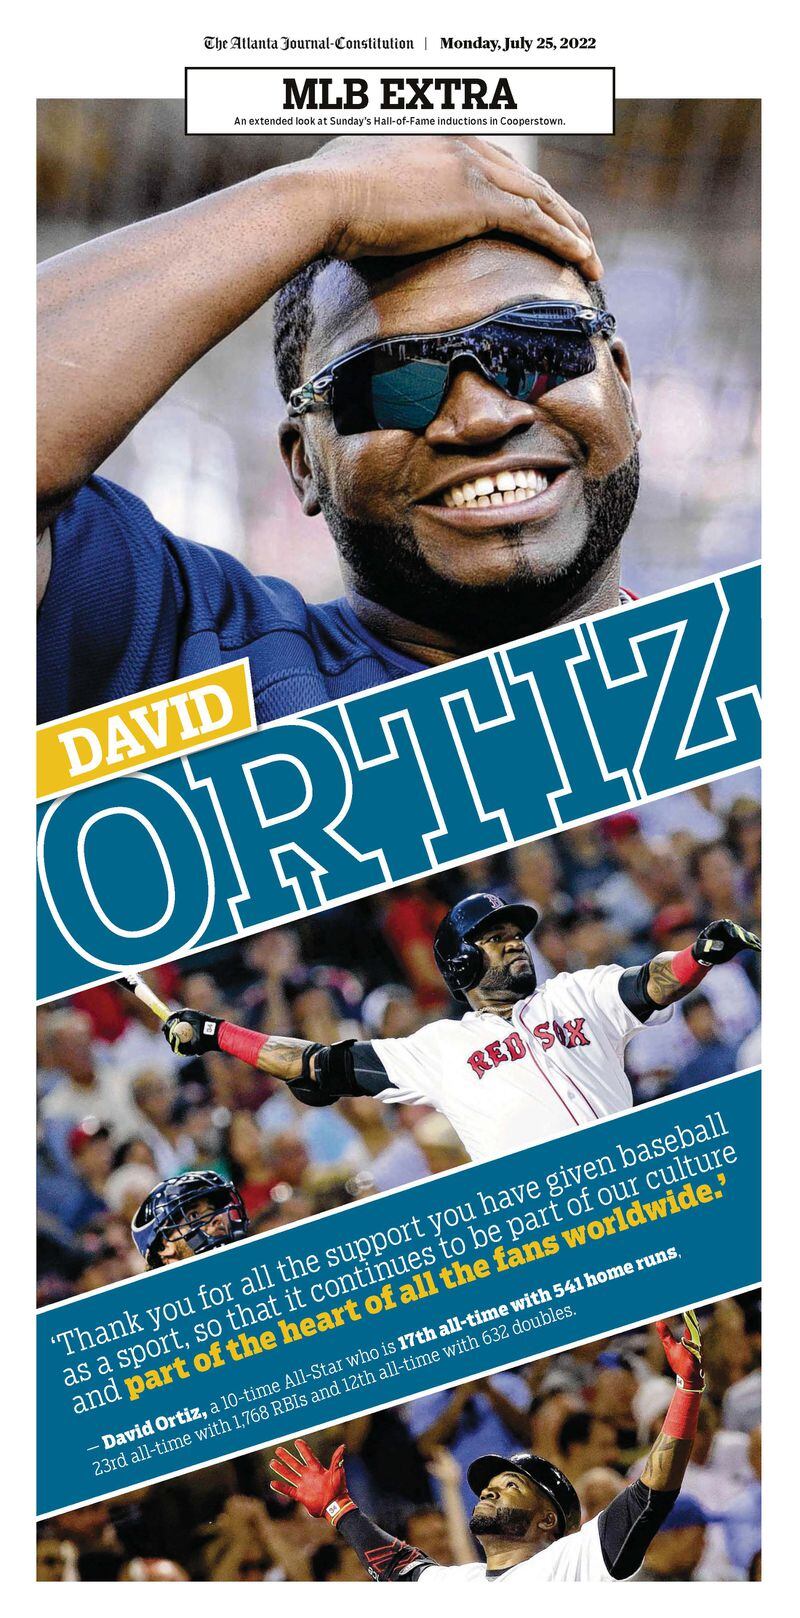 David Ortiz page as part of expanded coverage of the Baseball Hall of Fame ceremony in Monday’s ePaper